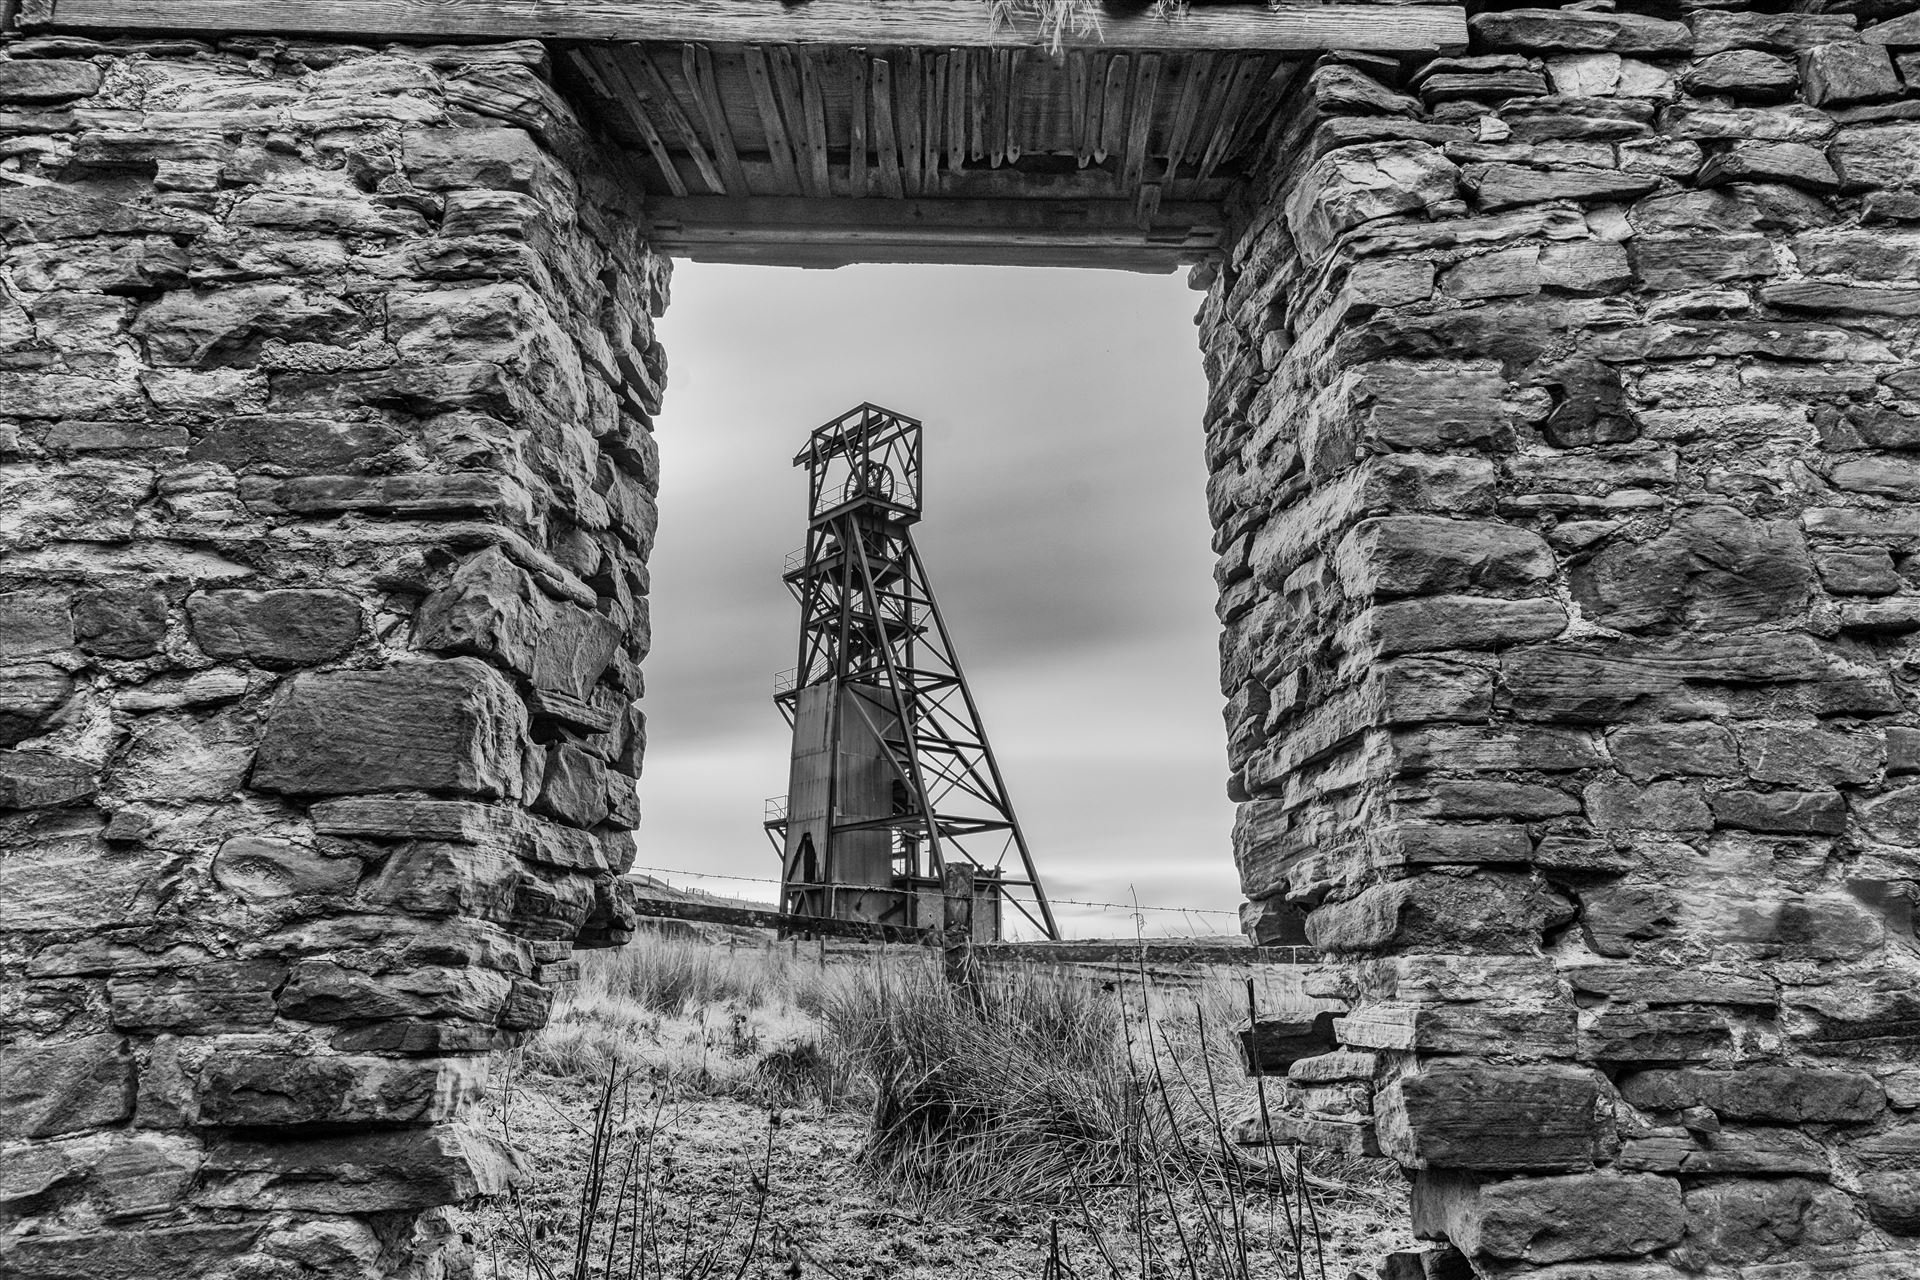 Groverake mine, Weardale This mine in a remote part of Weardale was first in operation in the 18th century, initially mining for iron ore but this was not as productive as had been hoped so they later switched to mining for fluorspar until the closure in 1999. by philreay